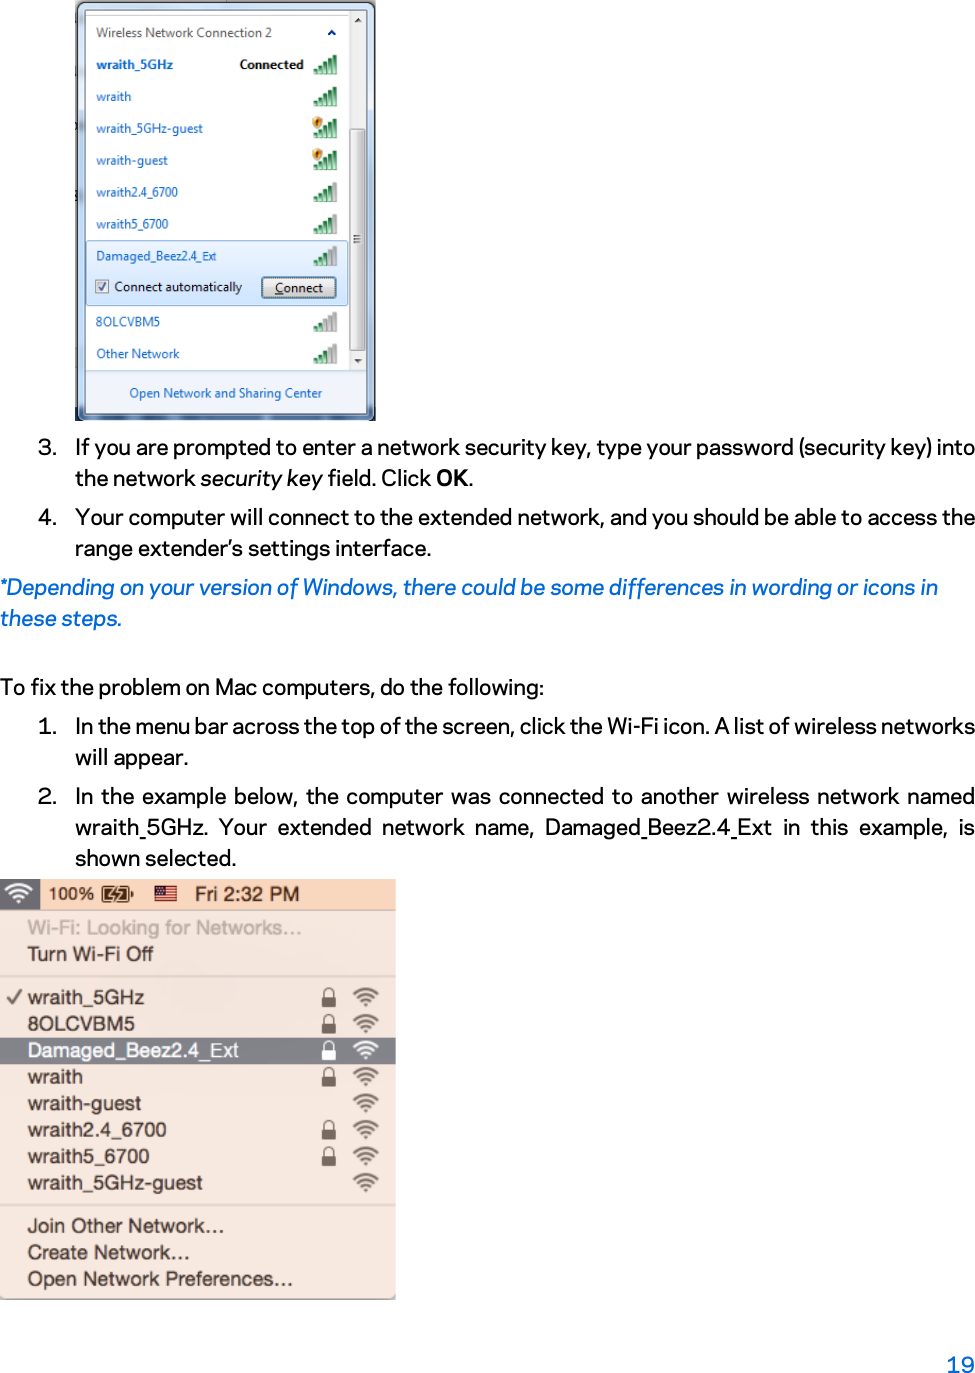  3. If you are prompted to enter a network security key, type your password (security key) into the network security key field. Click OK. 4. Your computer will connect to the extended network, and you should be able to access the range extender’s settings interface. *Depending on your version of Windows, there could be some differences in wording or icons in these steps. To fix the problem on Mac computers, do the following: 1. In the menu bar across the top of the screen, click the Wi-Fi icon. A list of wireless networks will appear.  2. In the example below, the computer was connected to another wireless network named wraith_5GHz.  Your extended  network name,  Damaged_Beez2.4_Ext  in this example, is shown selected.  19  